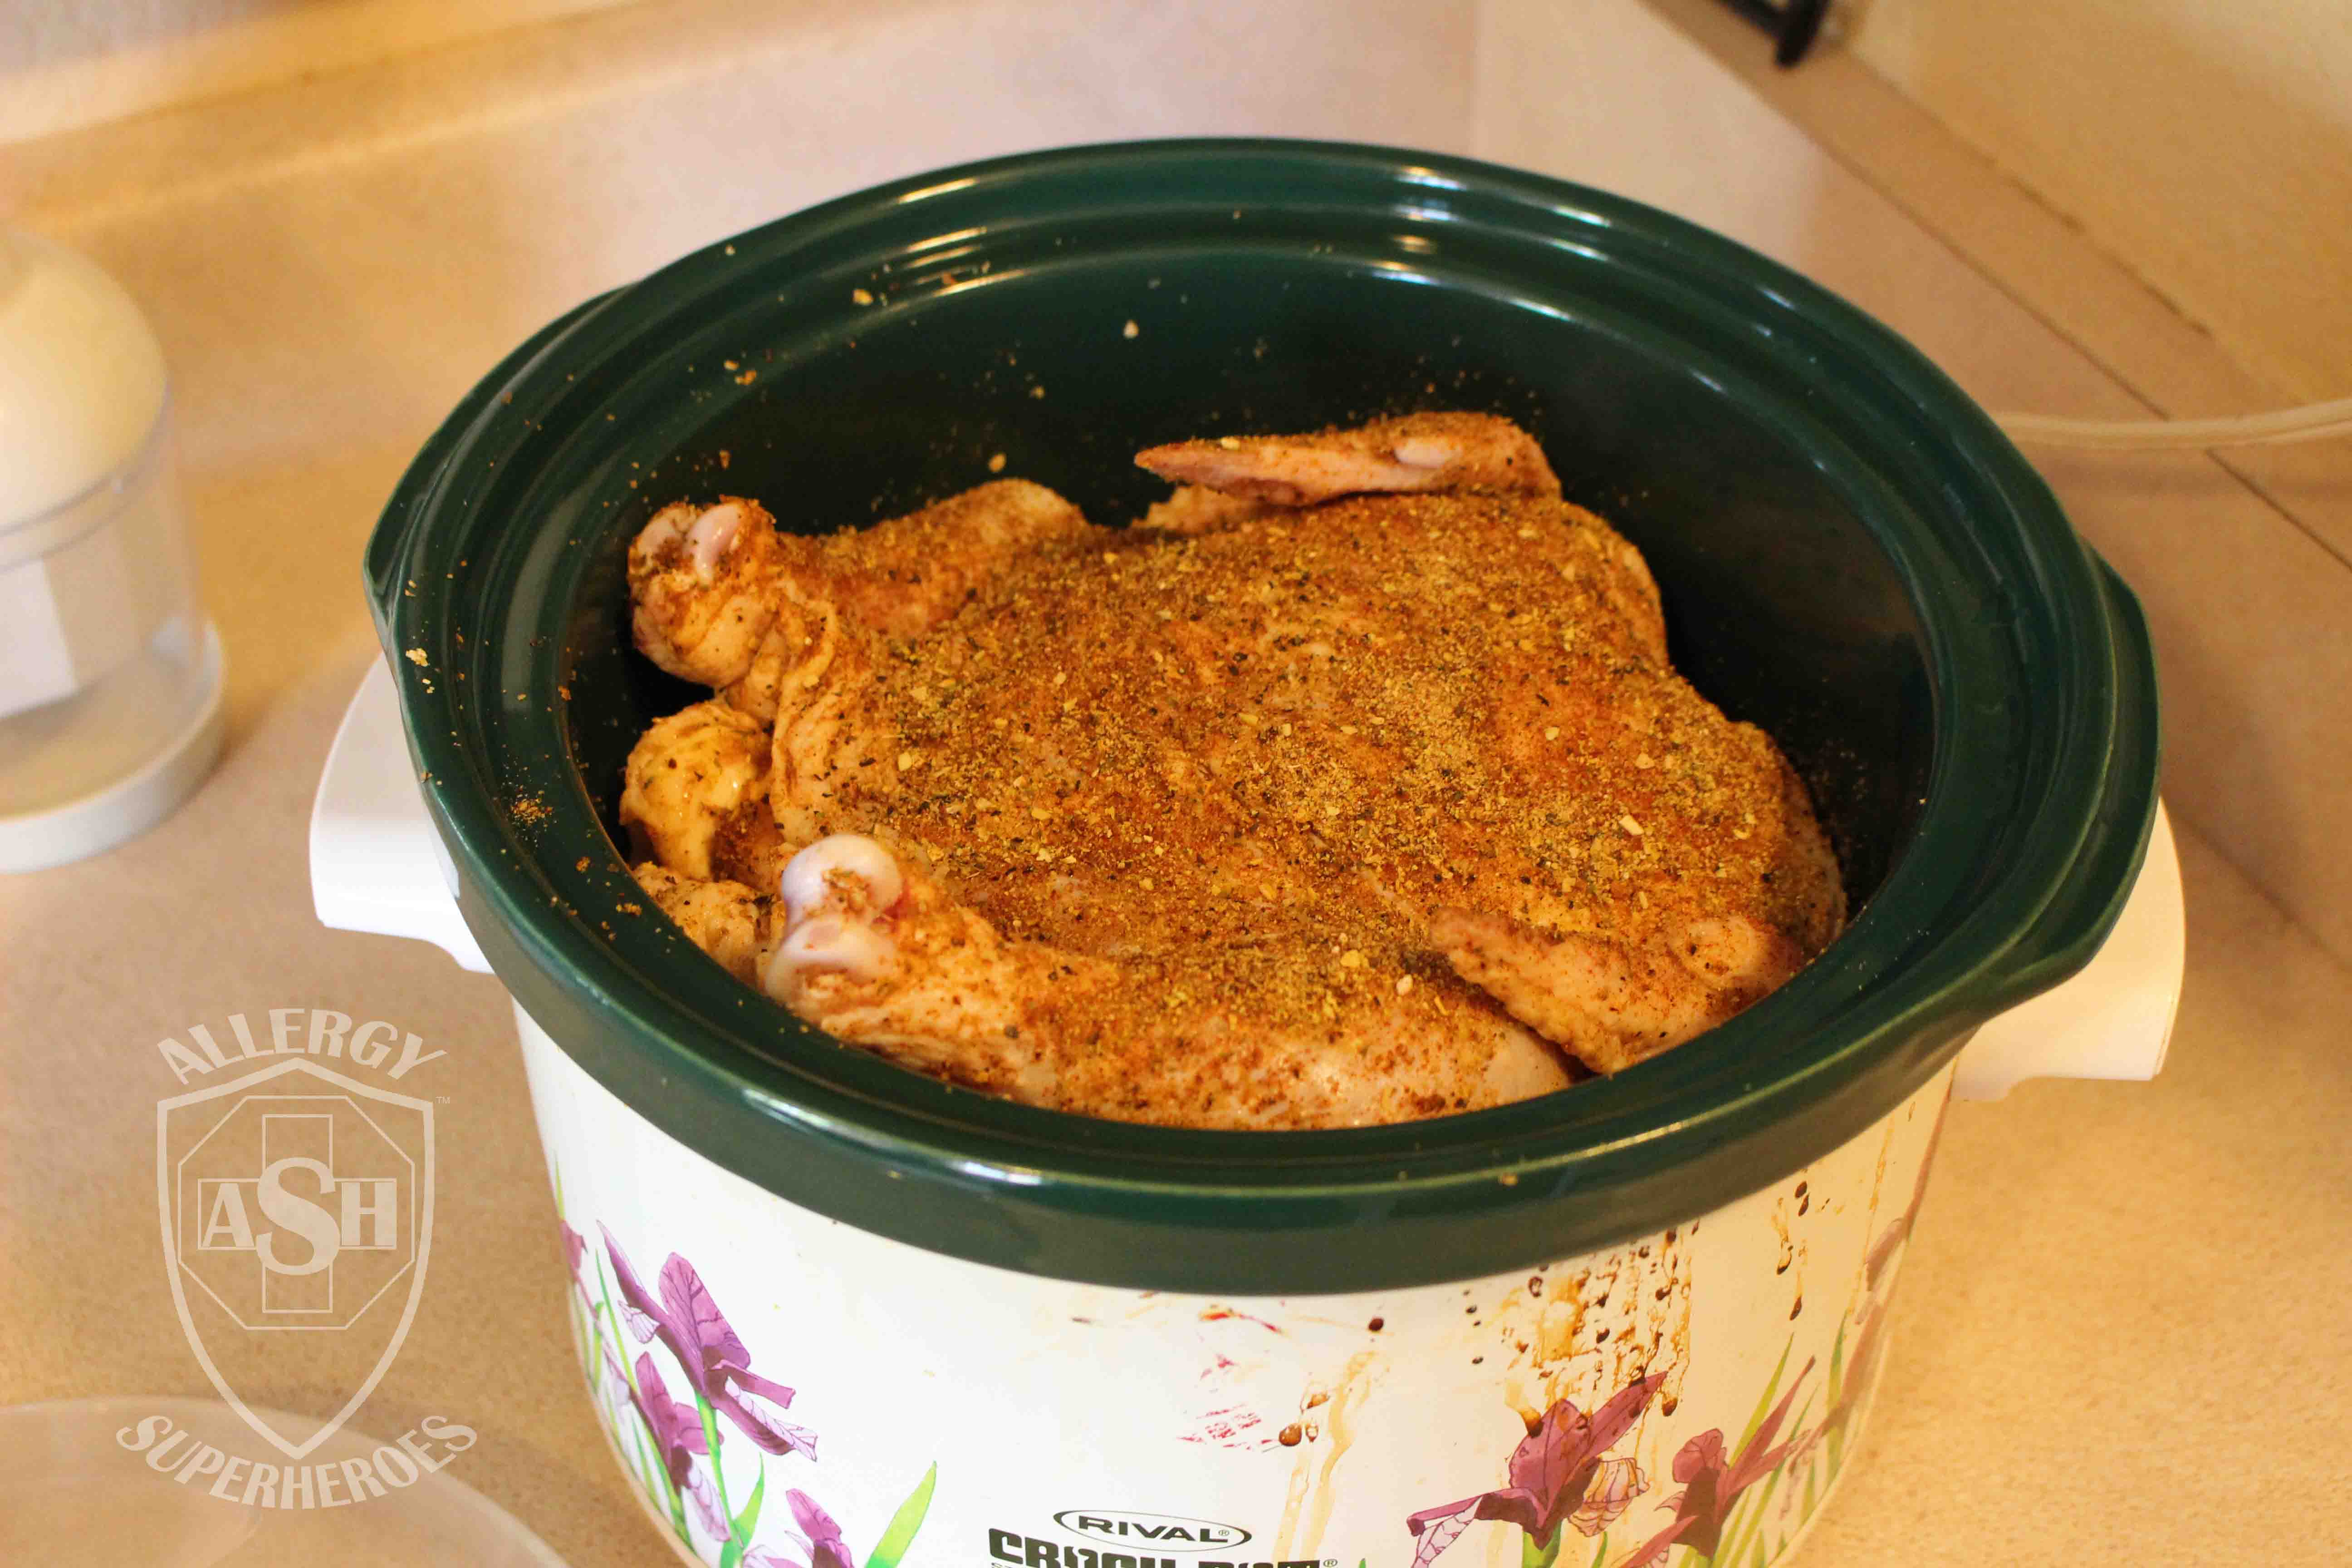 How to Roast a Whole Chicken in your Crockpot | Easy, Wholesome Meal! | from Allergy Superheroes